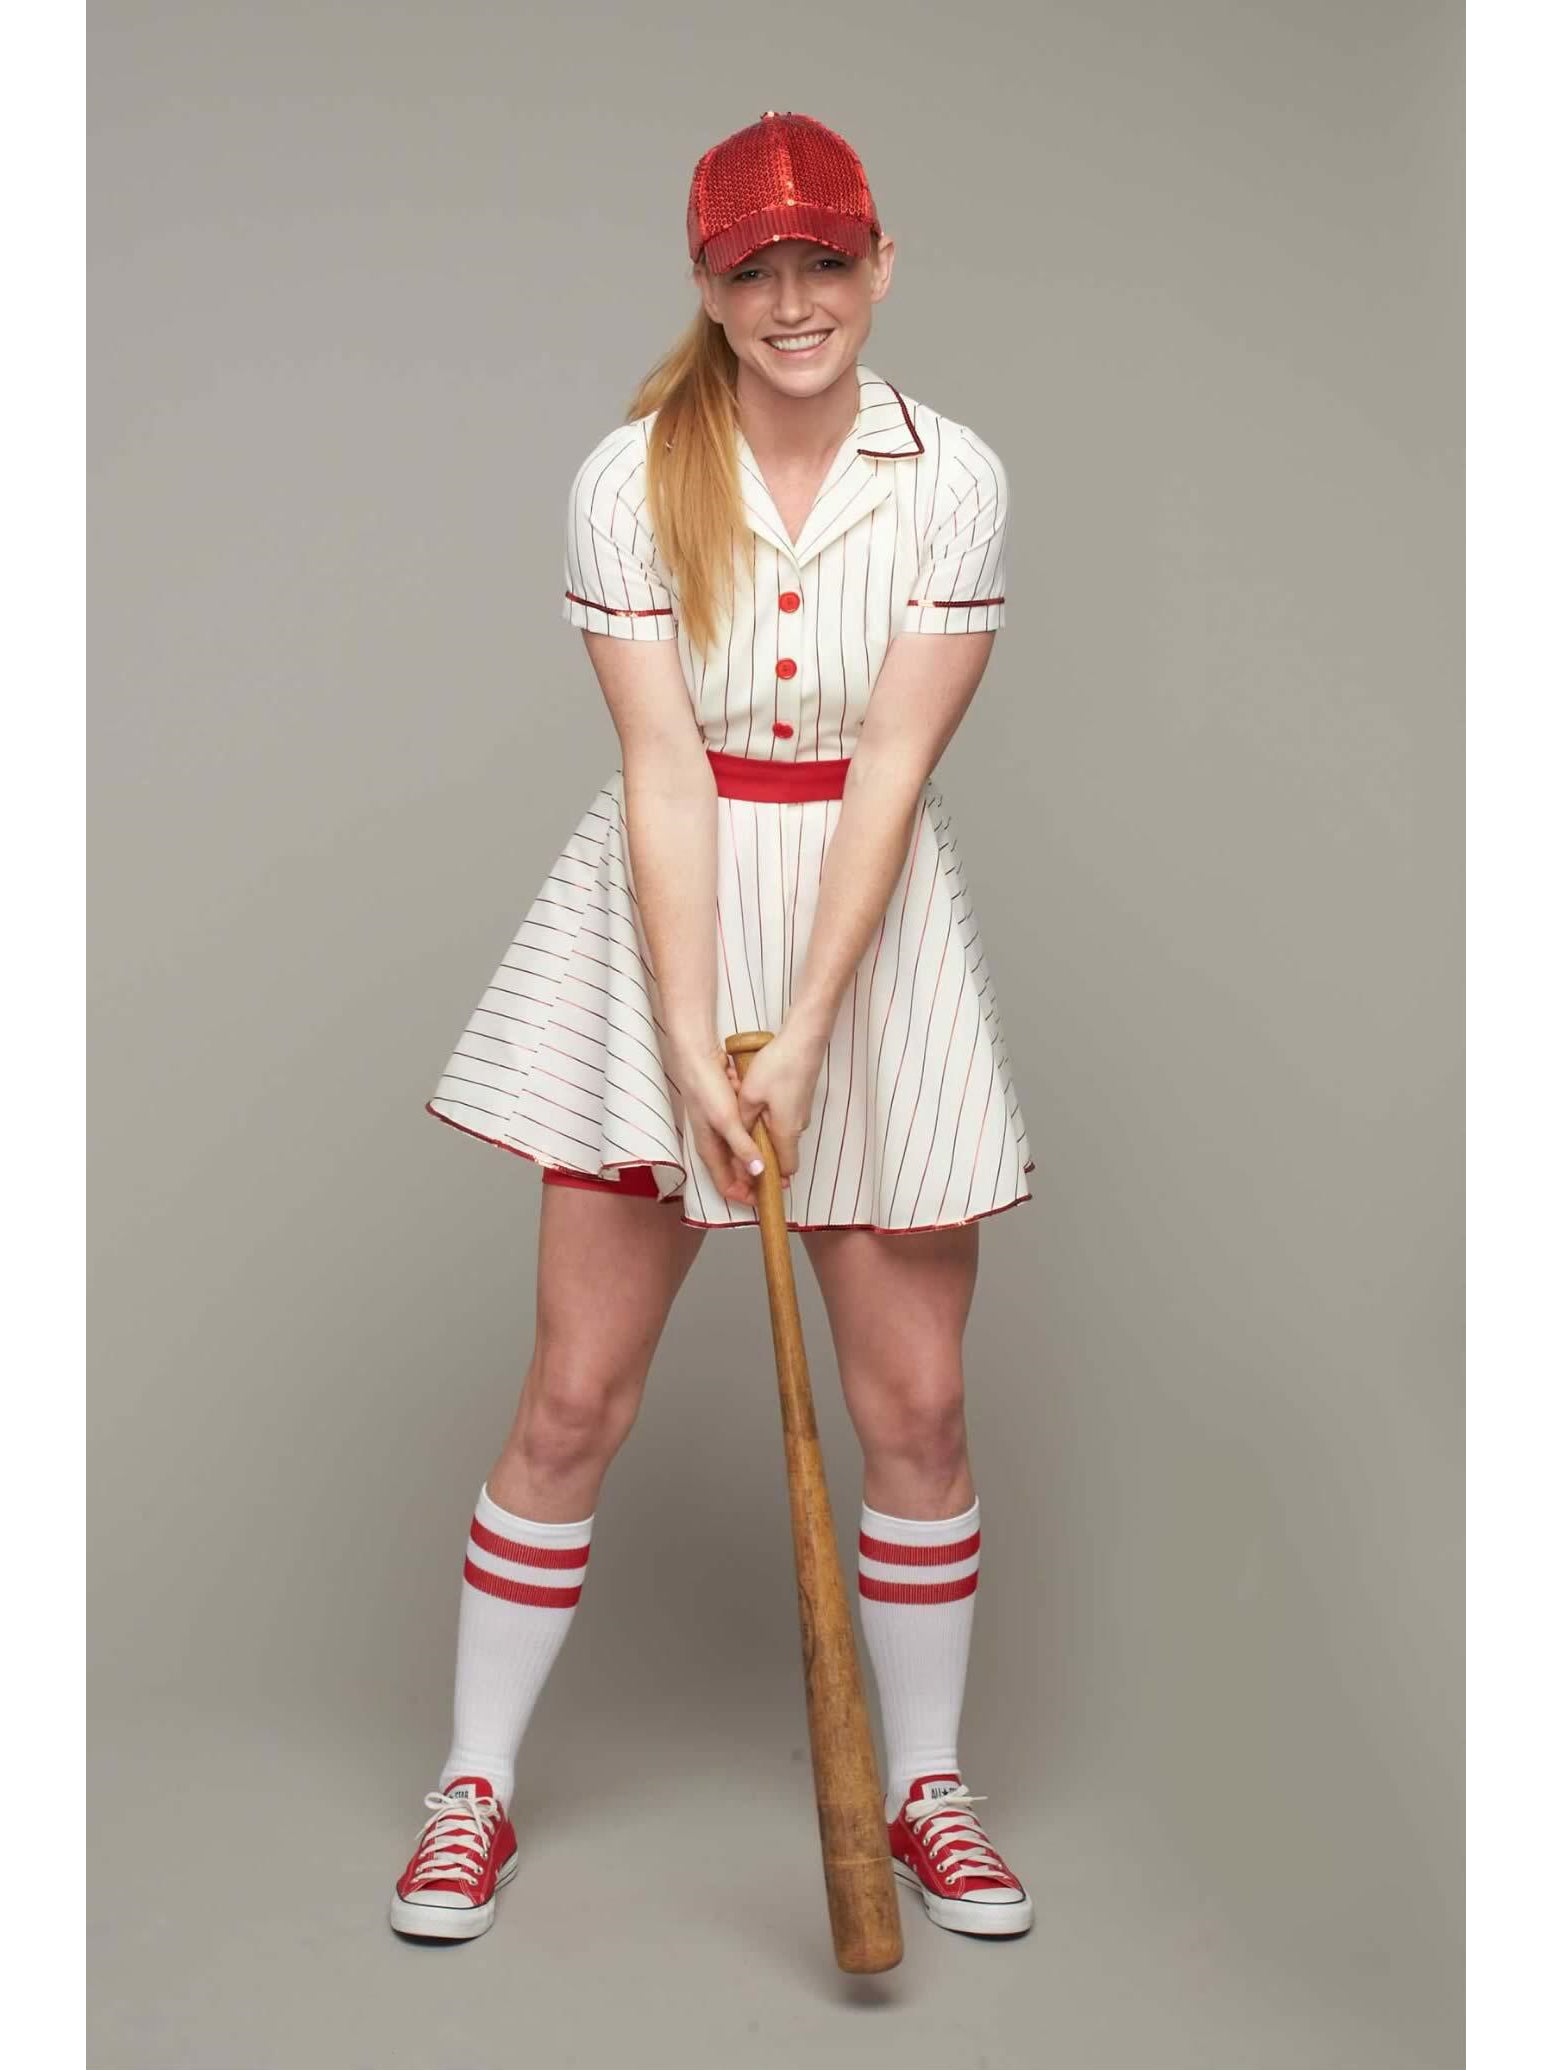 Baseball game outfit  Baseball game outfits, Gaming clothes, Baseball  outfit